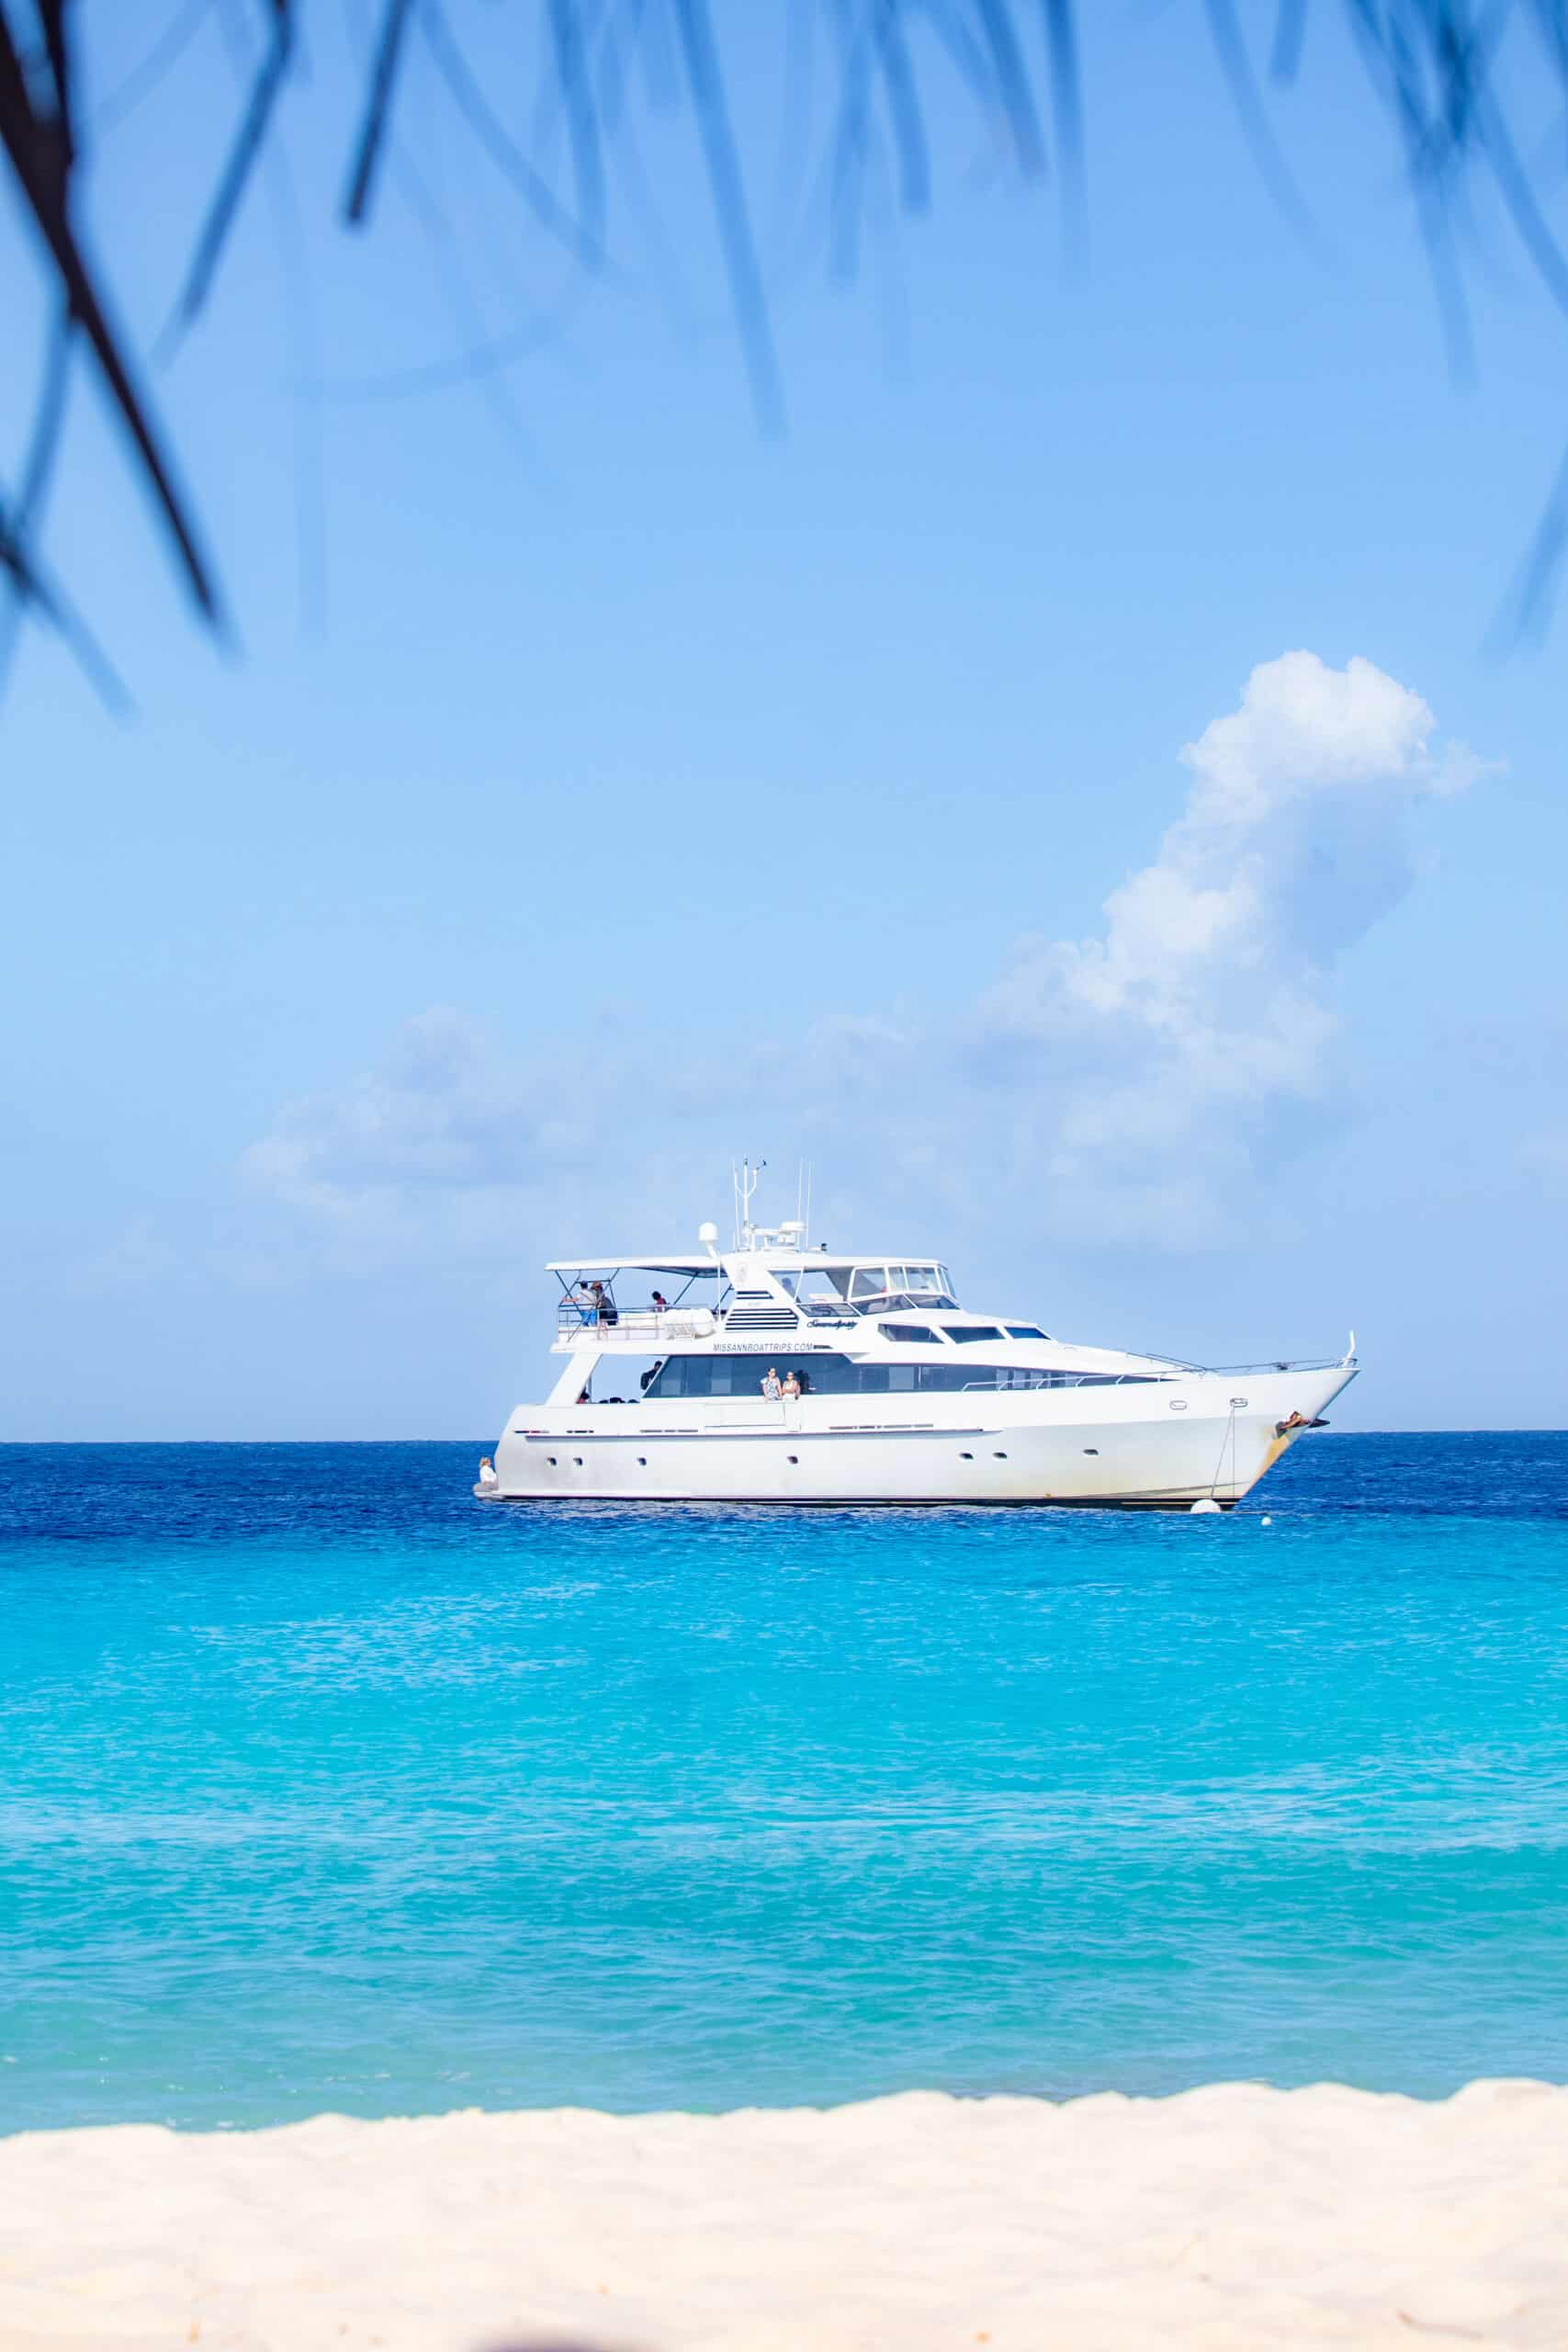 Klein Curacao Deluxe with Miss Ann Boat Trips